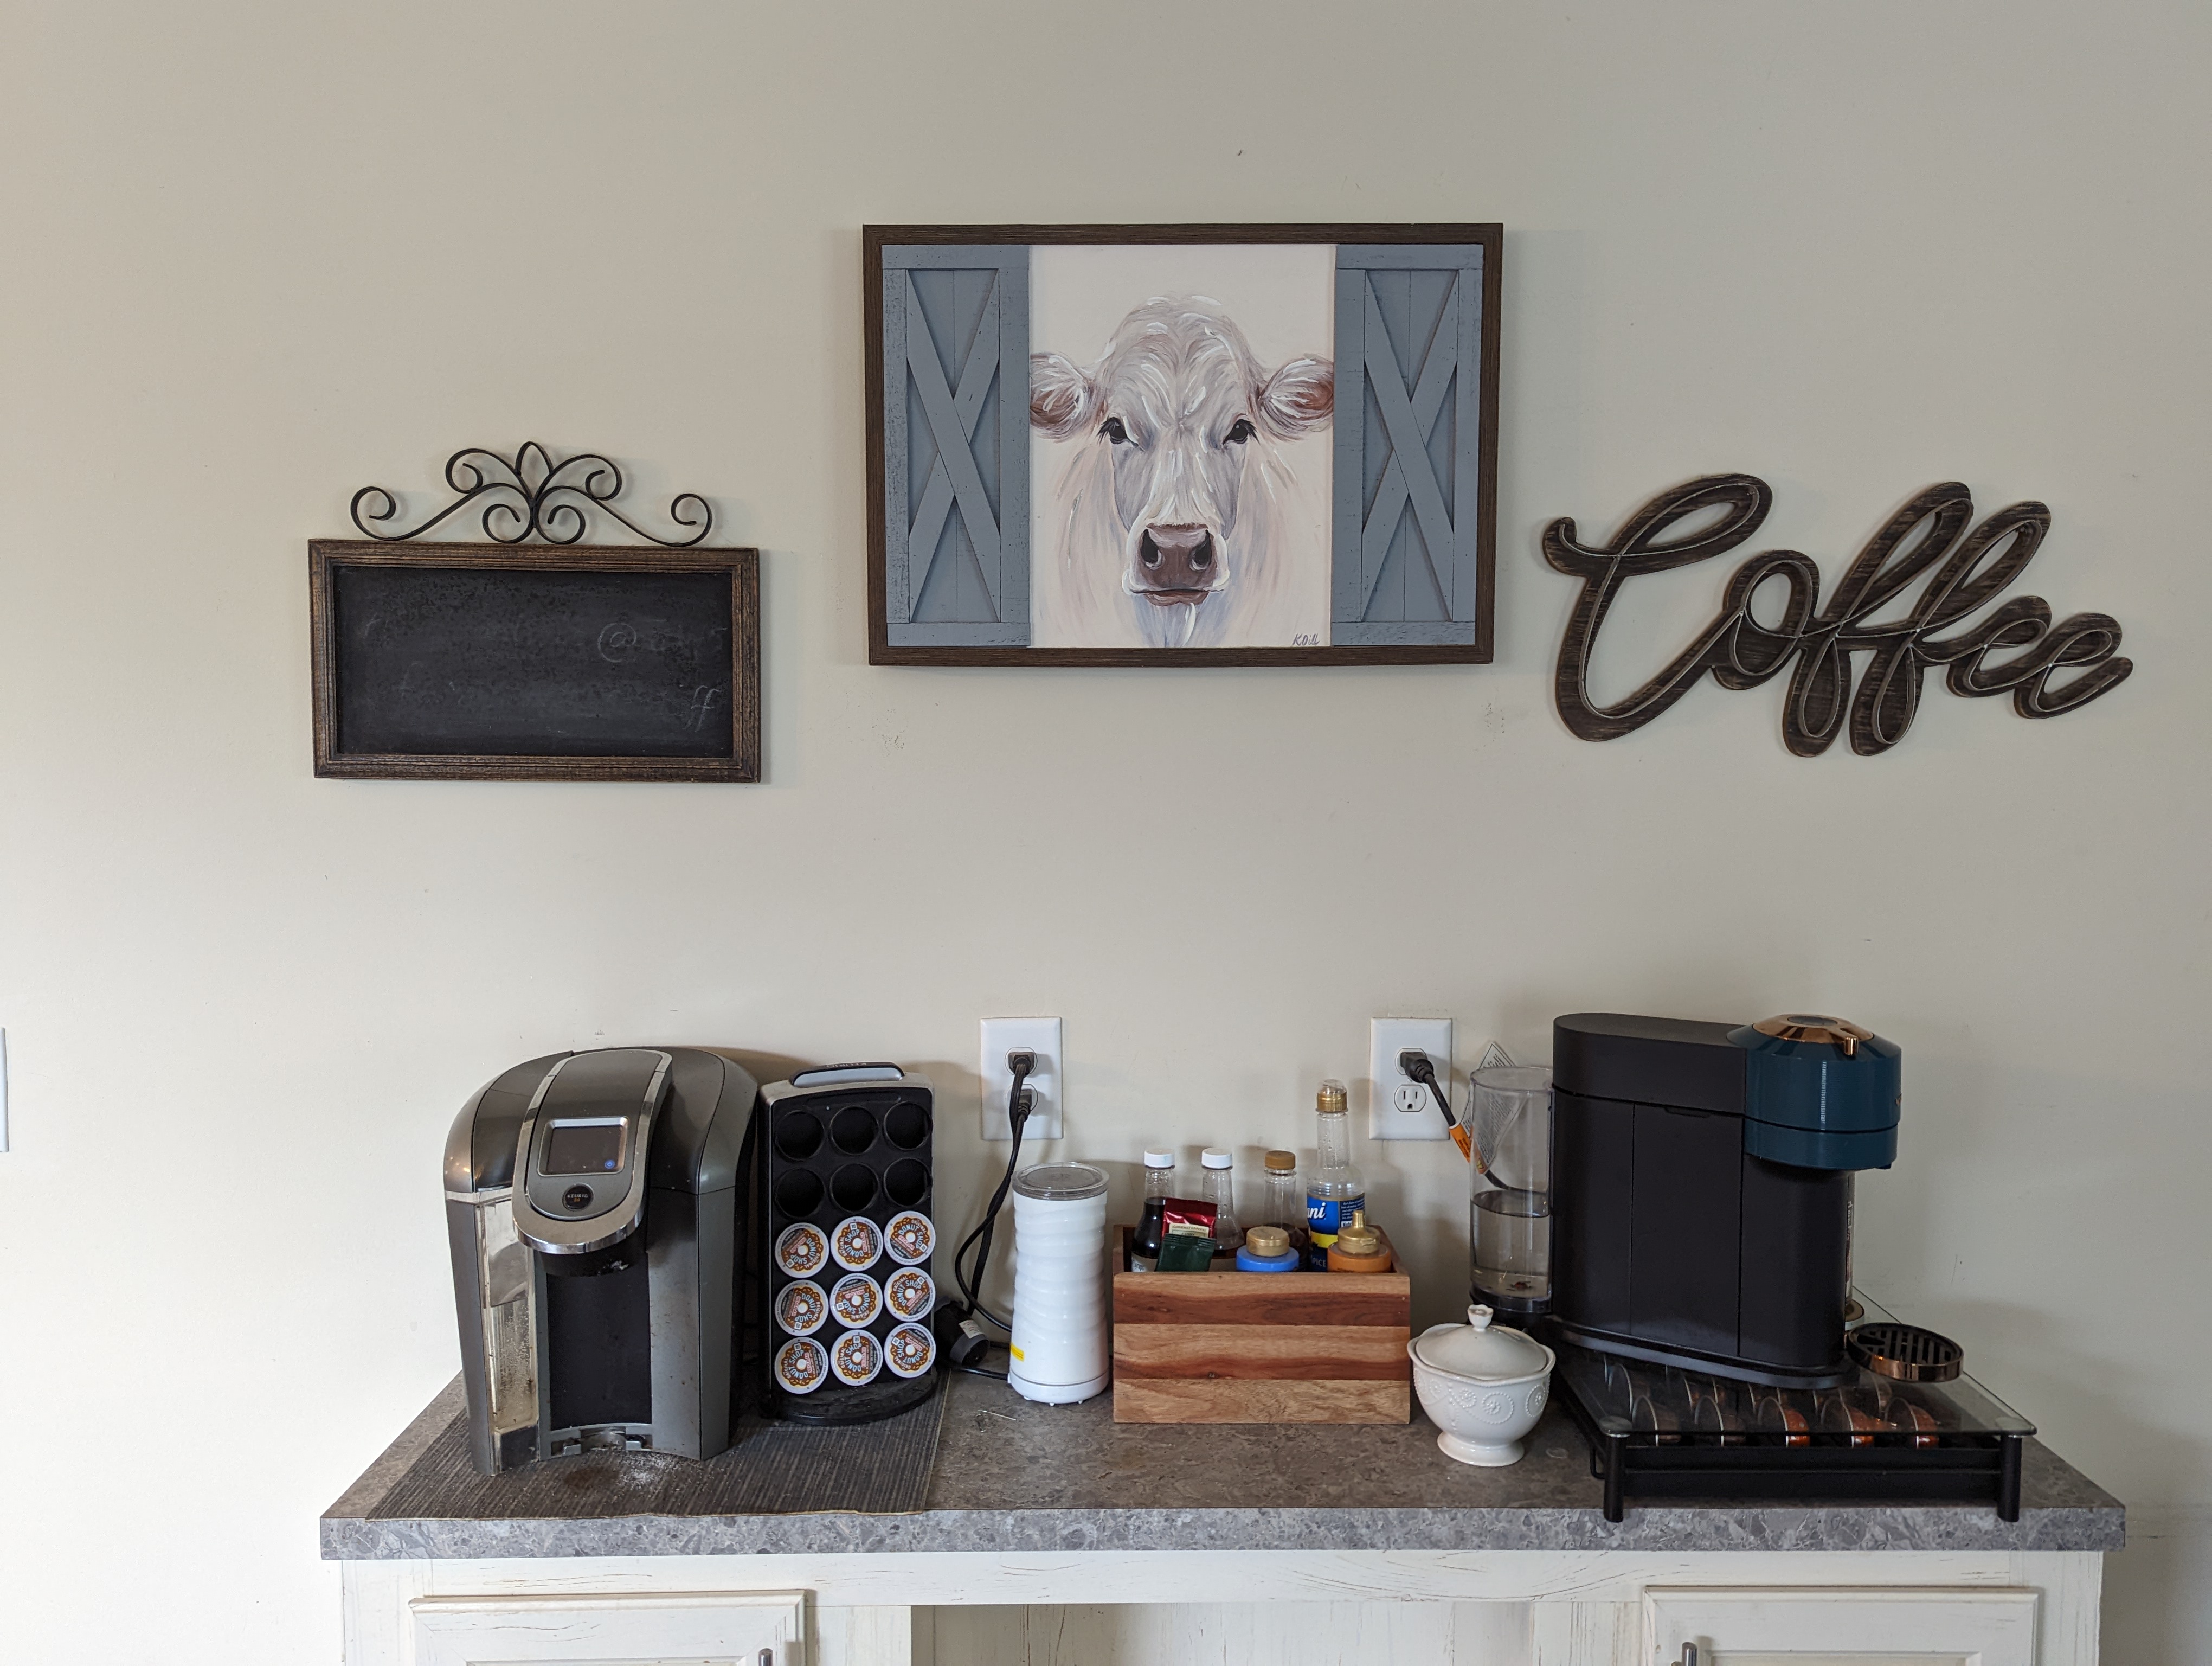 We have lots of cow decor!